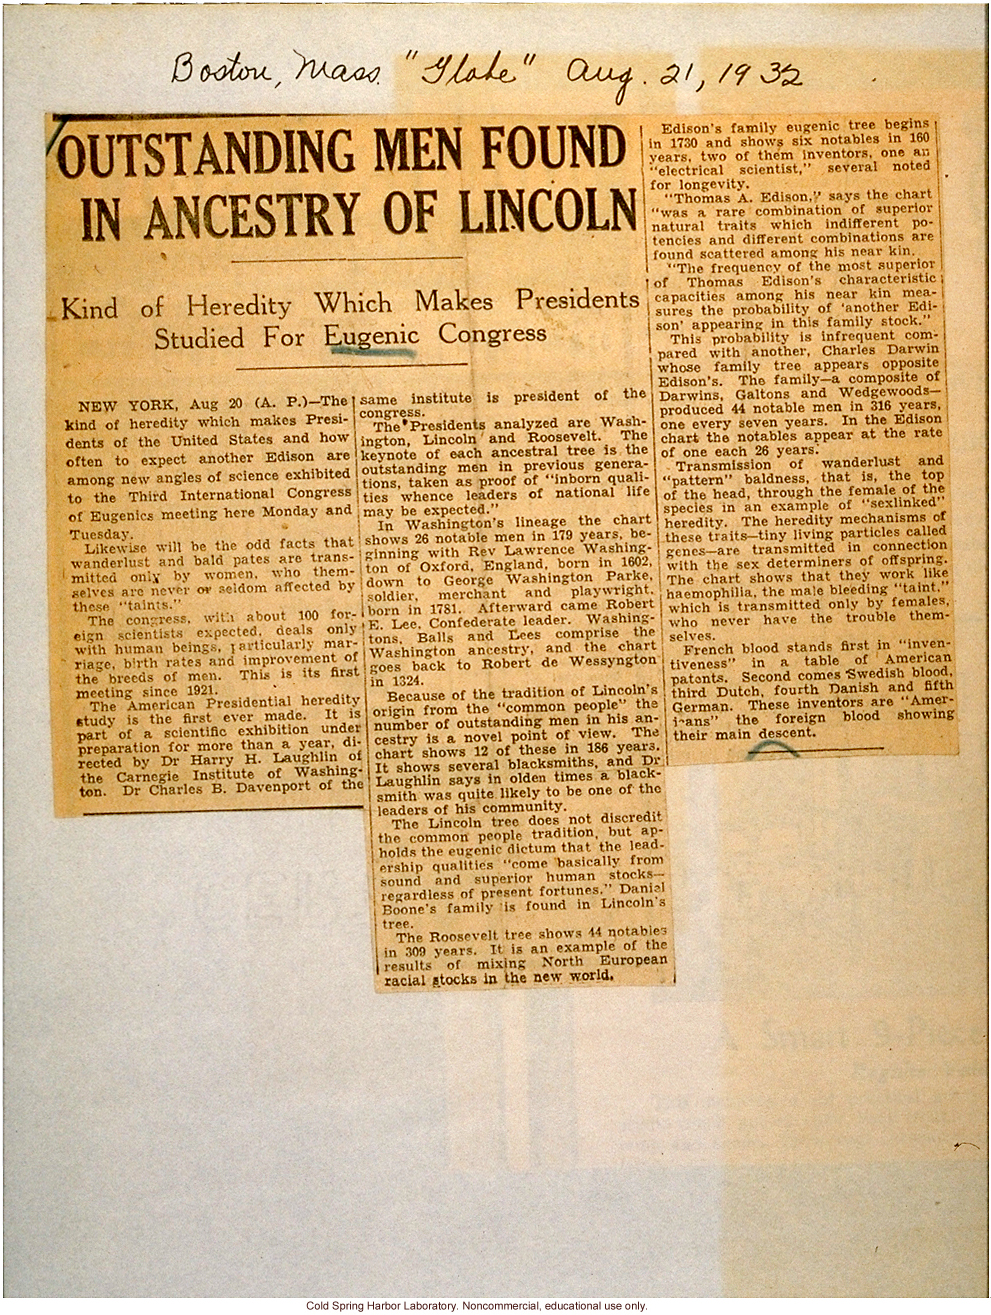 &quote;Outstanding Men Found in Ancestry of Lincoln,&quote; Boston Globe (8/21/1932), review of exhibits at Third International Eugenics Congress